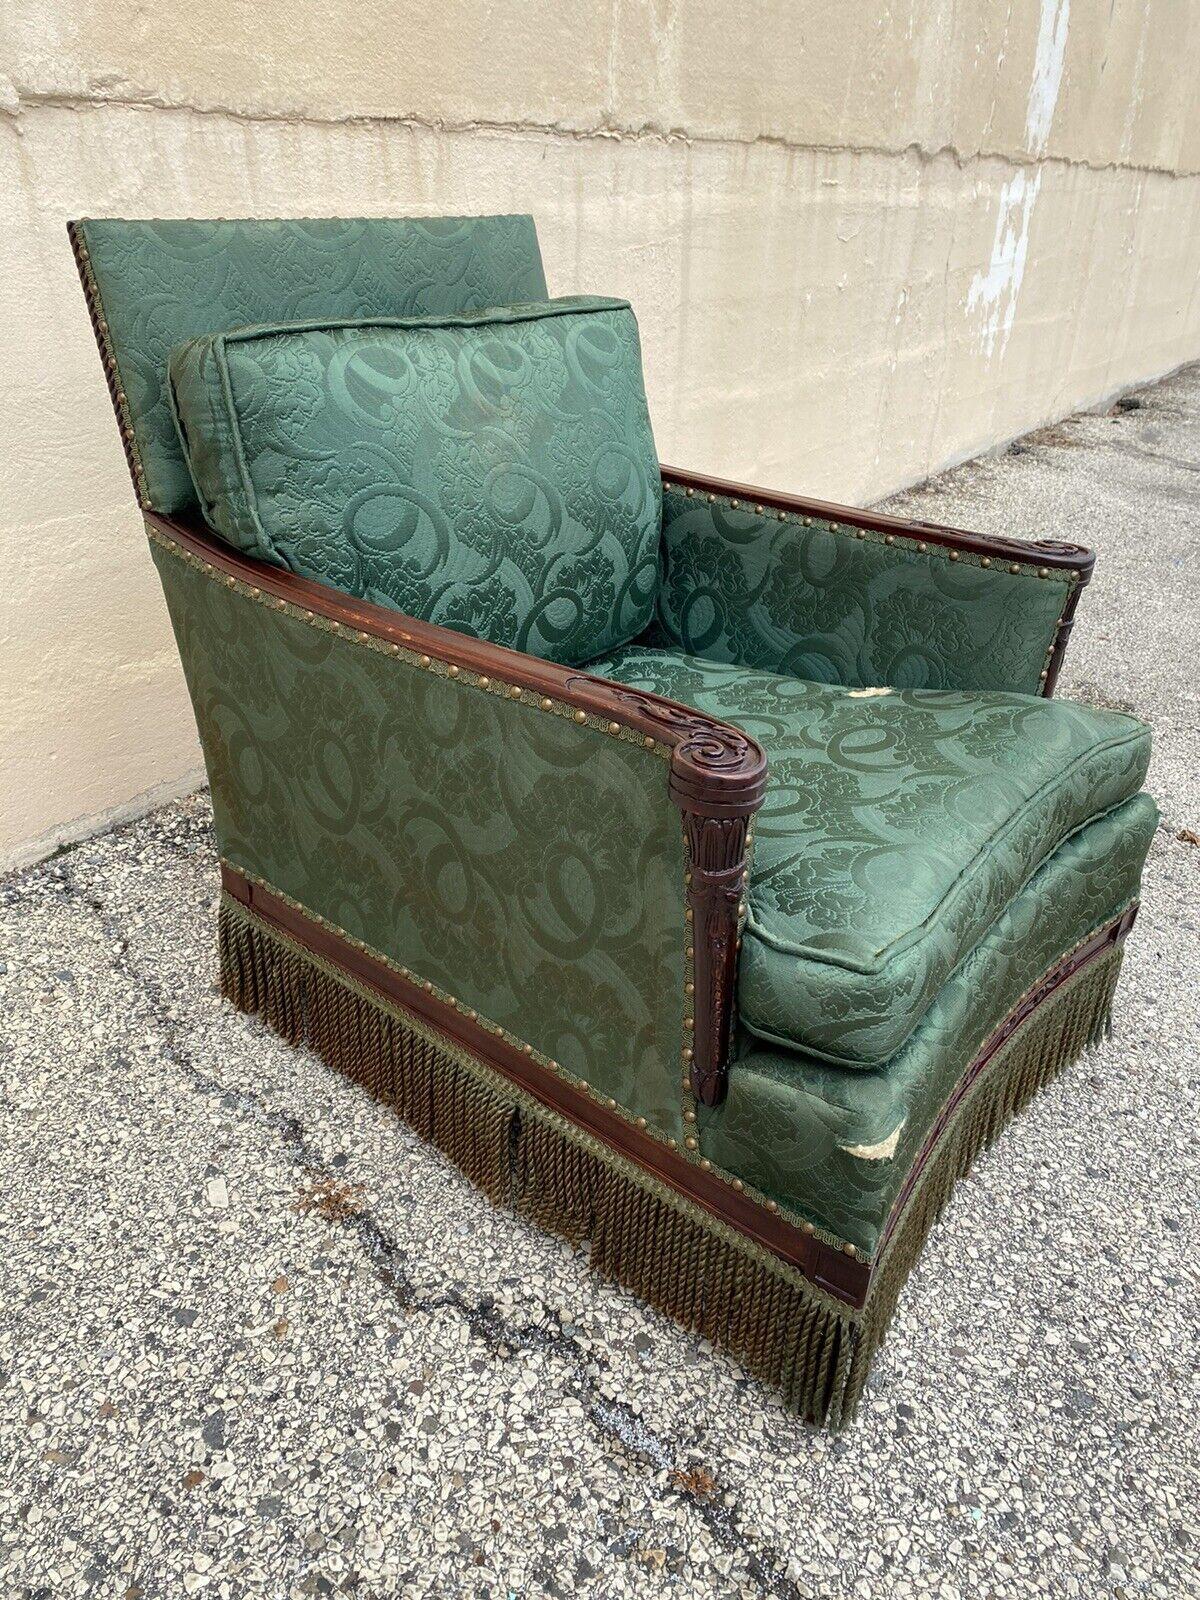 Antique French Hollywood regency carved mahogany Art Deco club lounge chair. Item features solid wood construction, beautiful wood grain, nicely carved details, very nice antique item, quality American craftsmanship, great style and form. Circa